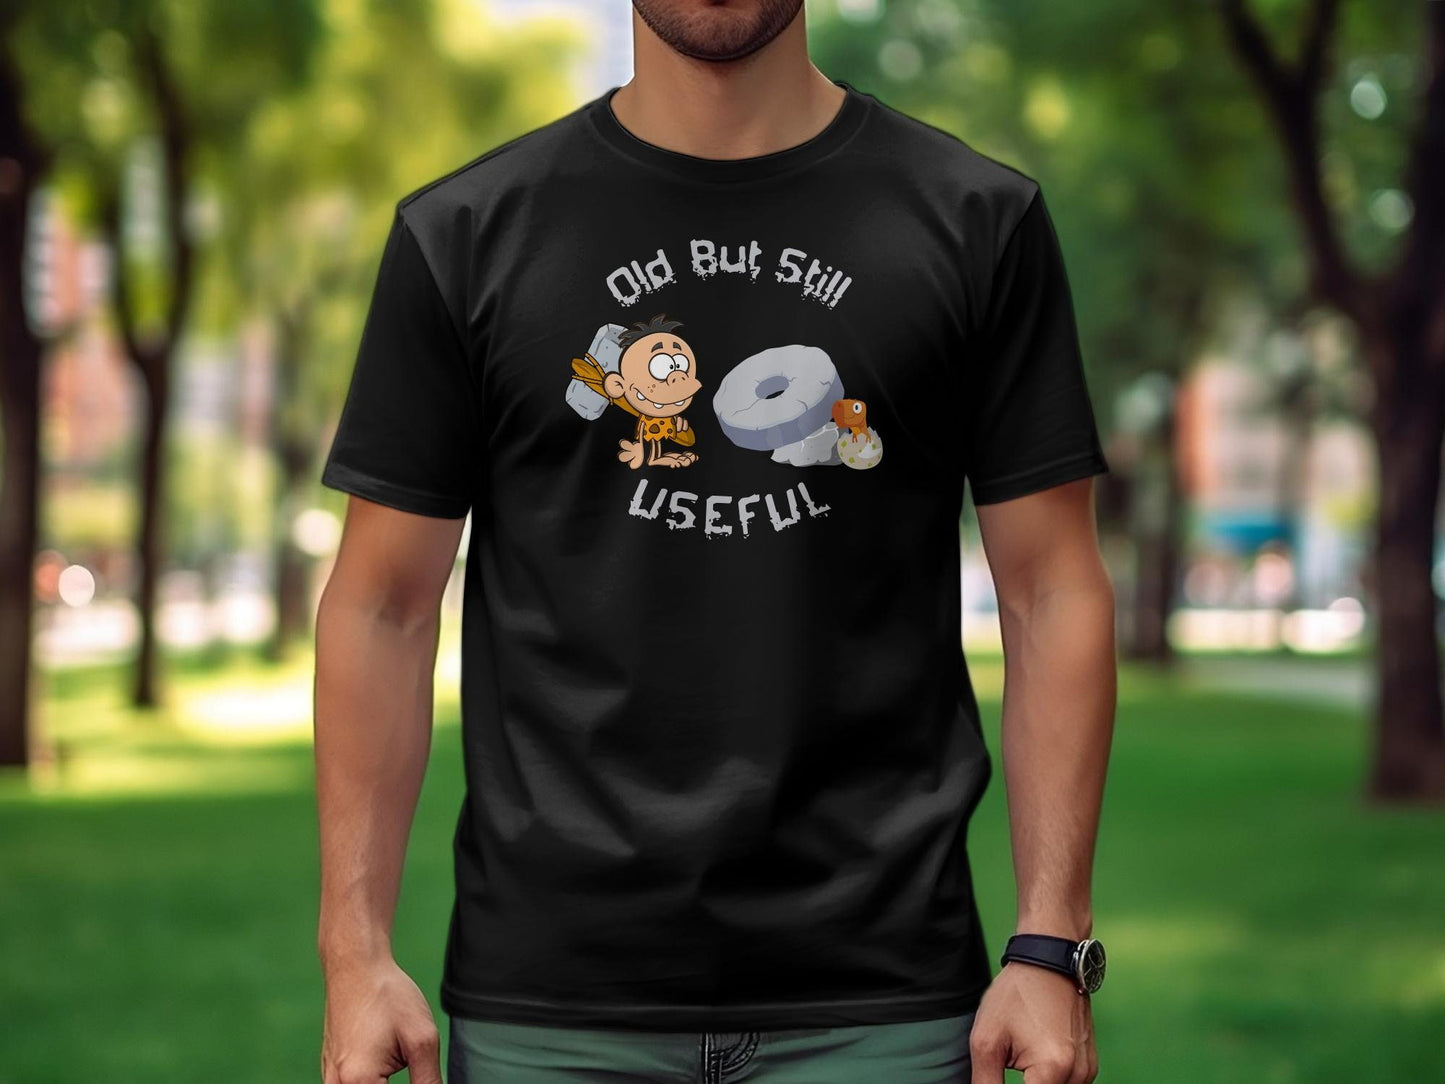 Old But Still Useful Funny Retirement Shirt, Retirement Gift Ideas, Funny Gift for Retired People, Old But Not Used Up Shirt